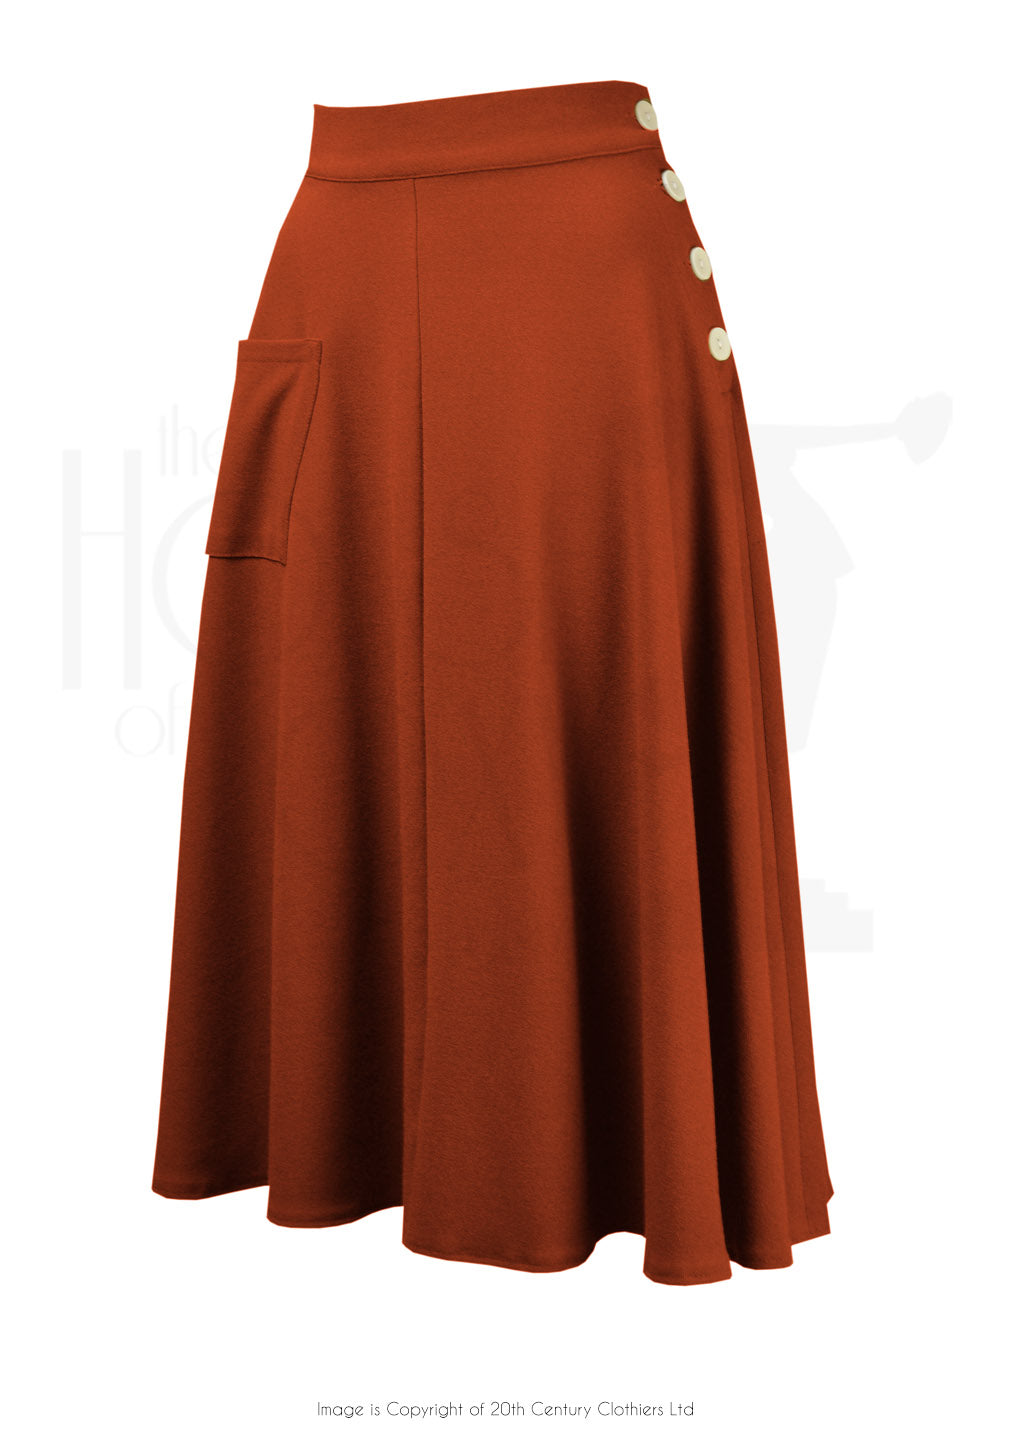 House of Foxy 1940’s Whirlaway Skirt in Rust